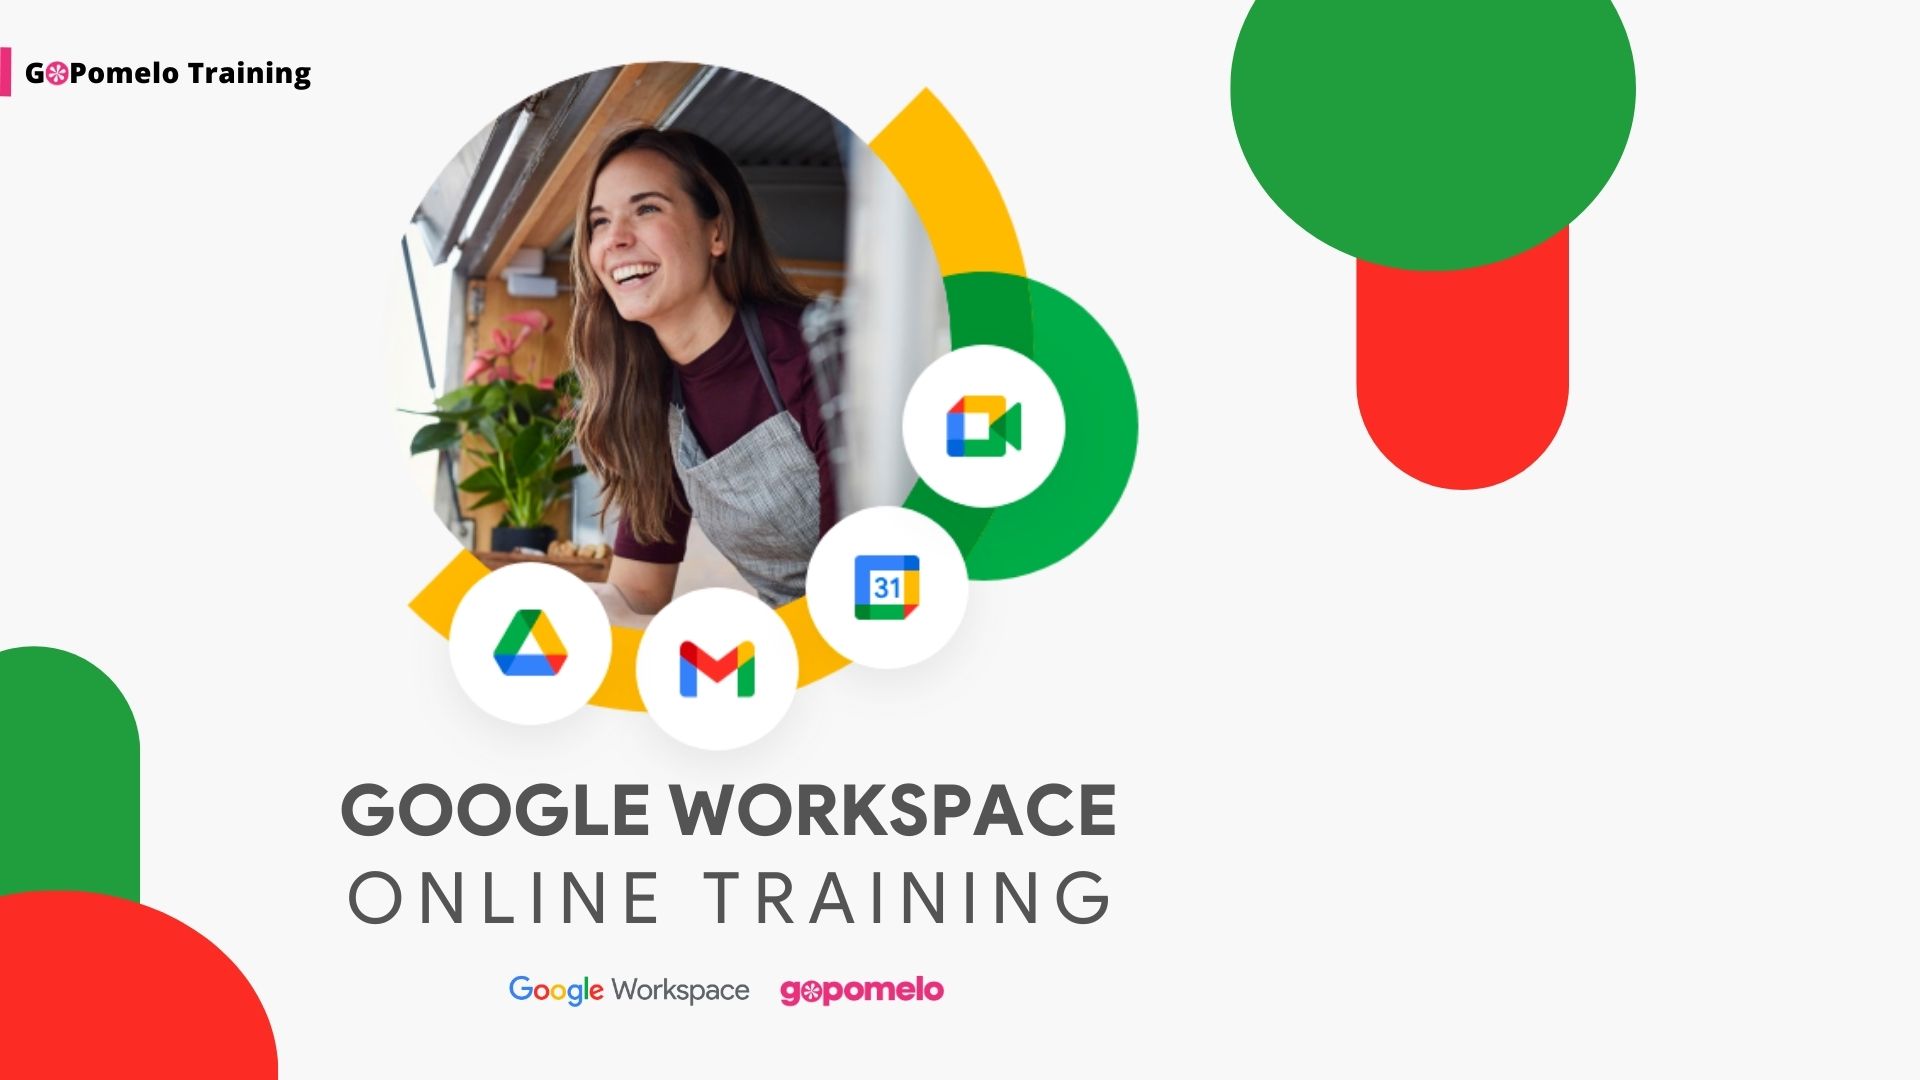 Google Workspace Training by GoPomelo